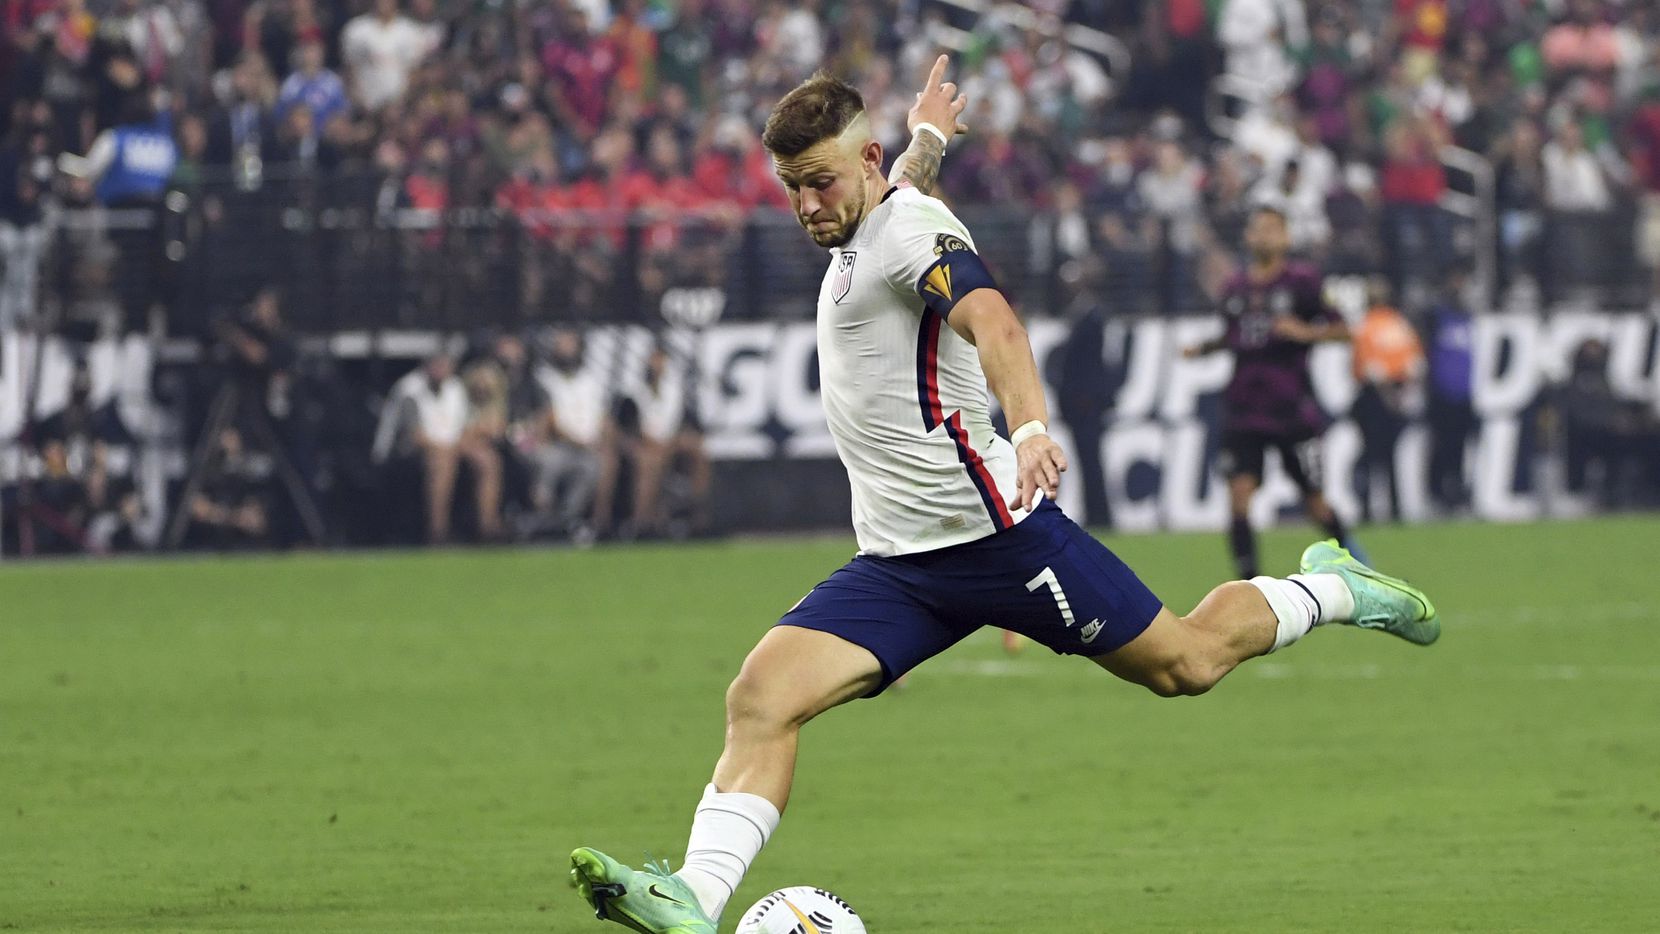 United States forward Paul Arriola (7) kicks the ball against Mexico during the first half...